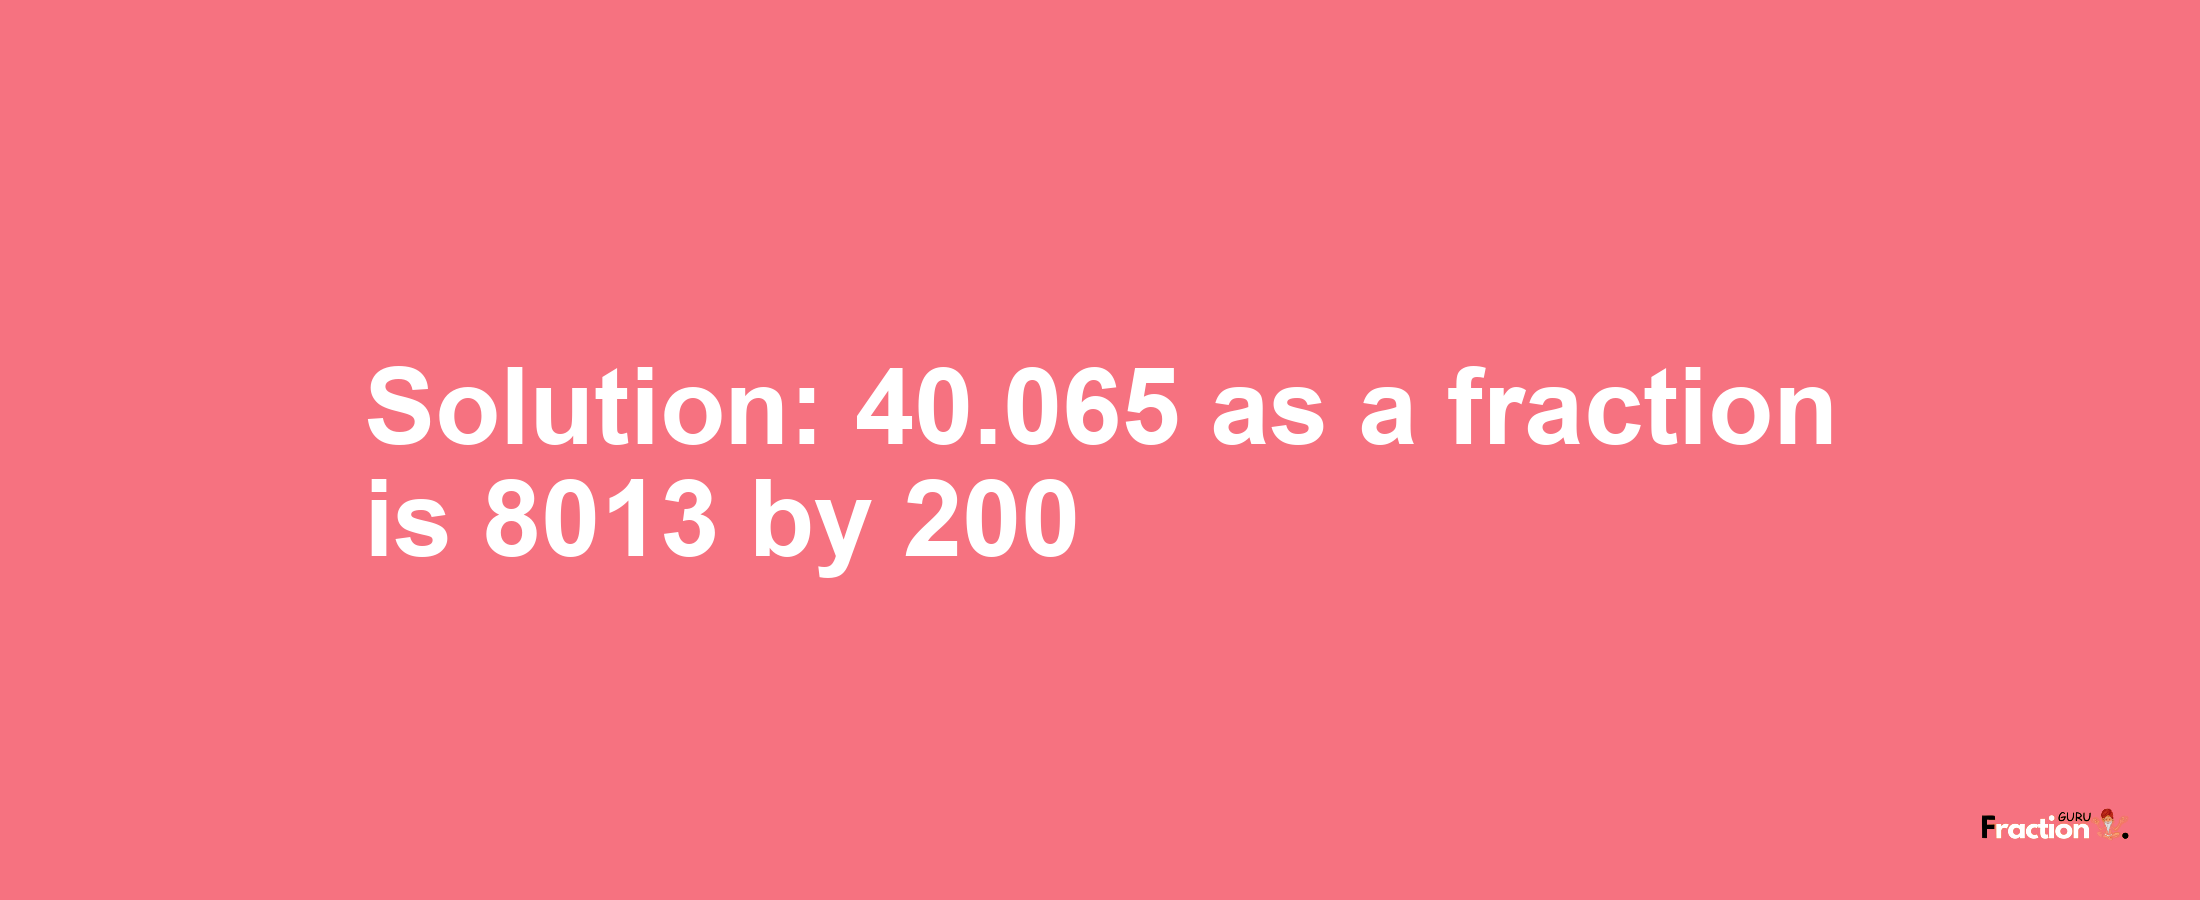 Solution:40.065 as a fraction is 8013/200